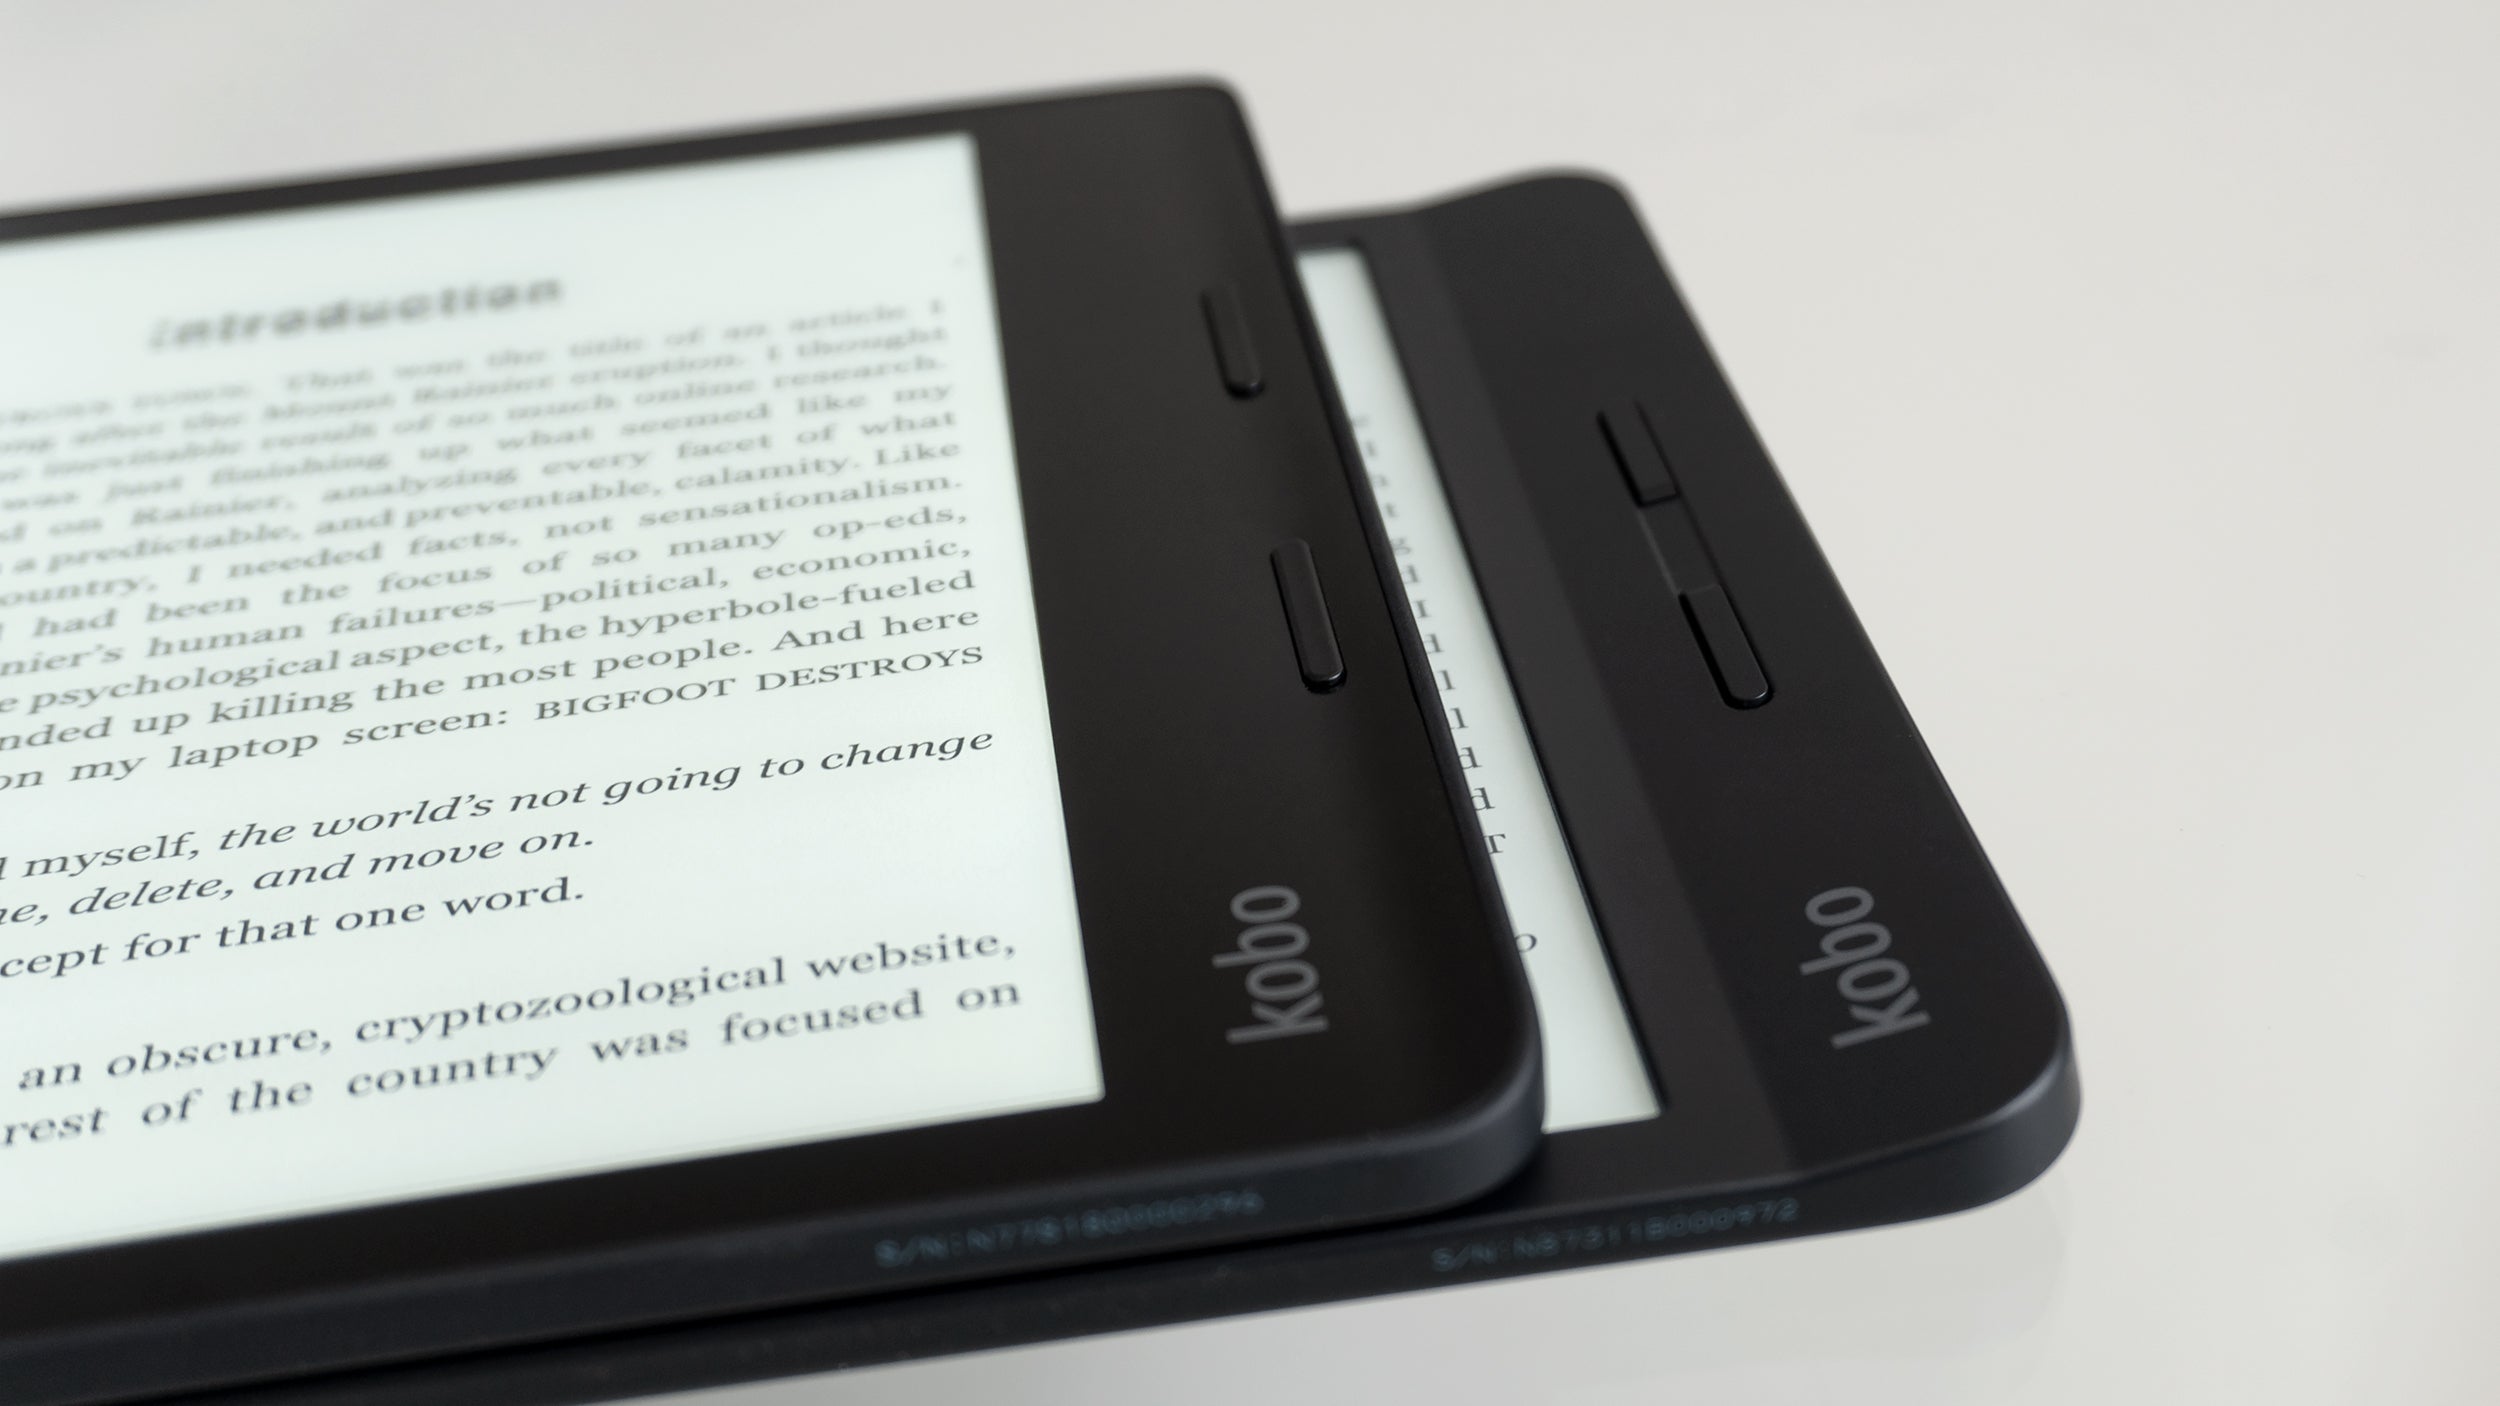 The Kobo Sage (left, top) features the same raised lip on the edge as the Kobo Libra (right, bottom) making it easier to hold and grip single-handed, as well as a pair of page turn navigation buttons. (Photo: Andrew Liszewski - Gizmodo)